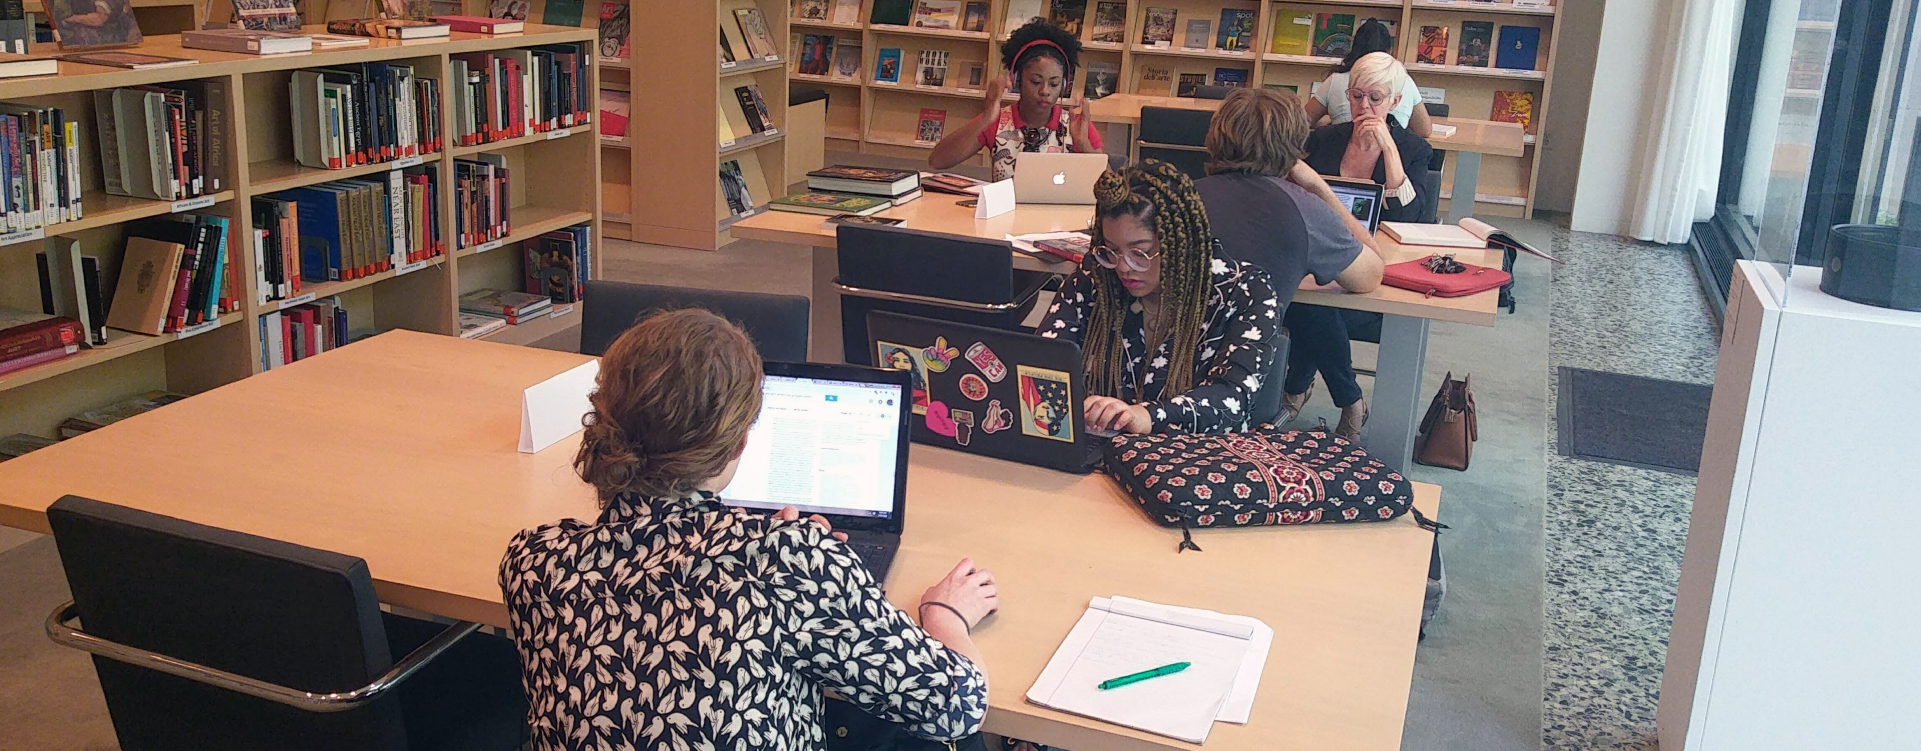 photograph of students studying in a library.